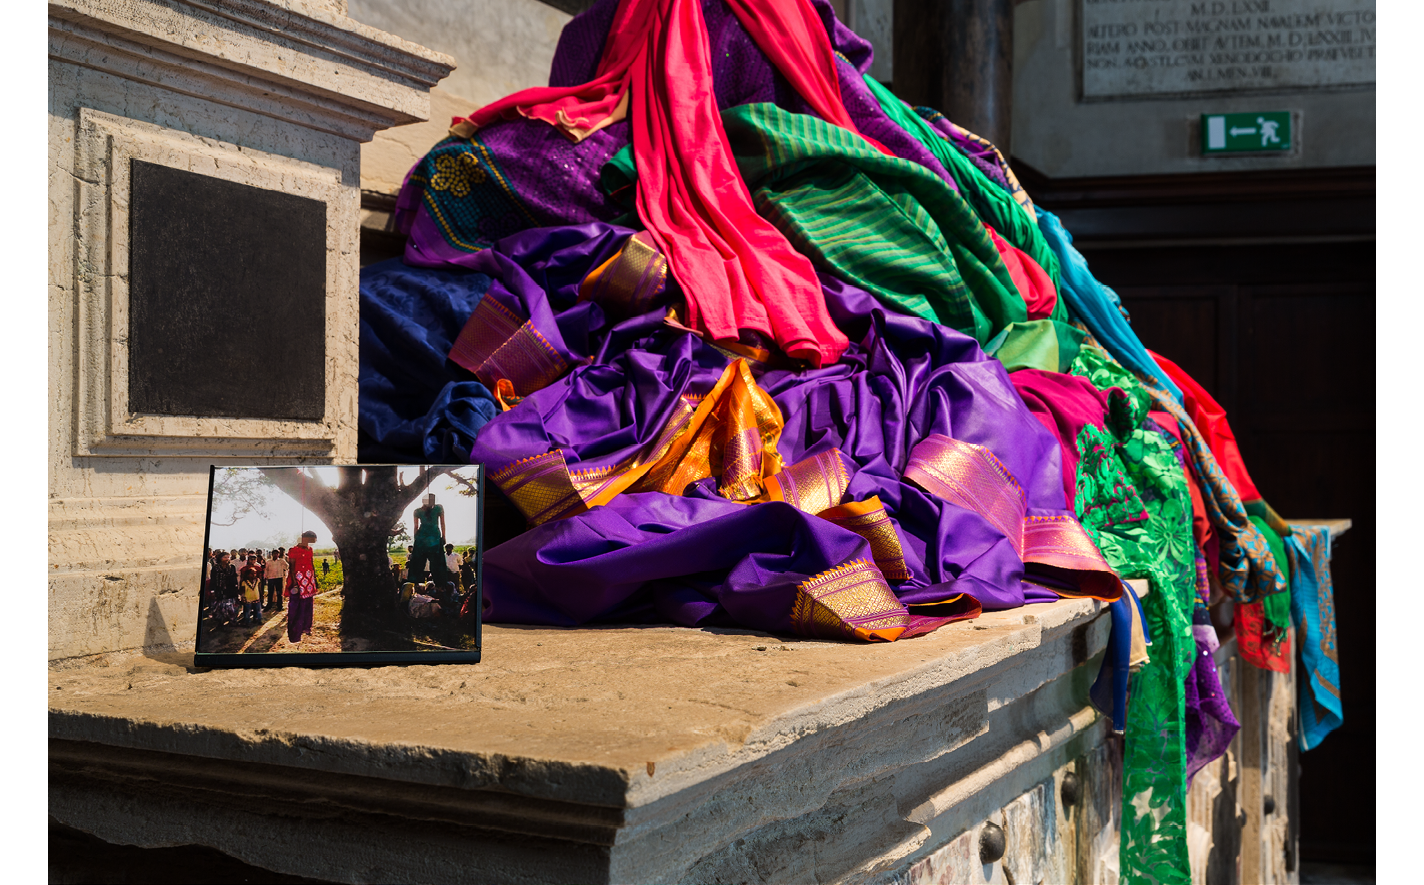 A 3/4 side view of the pile of brightly colored (red, purple, green, & gold) saris arranged carefully on the high stone altar with a small photograph of two lynched girls hanging from a tree facing the viewer.